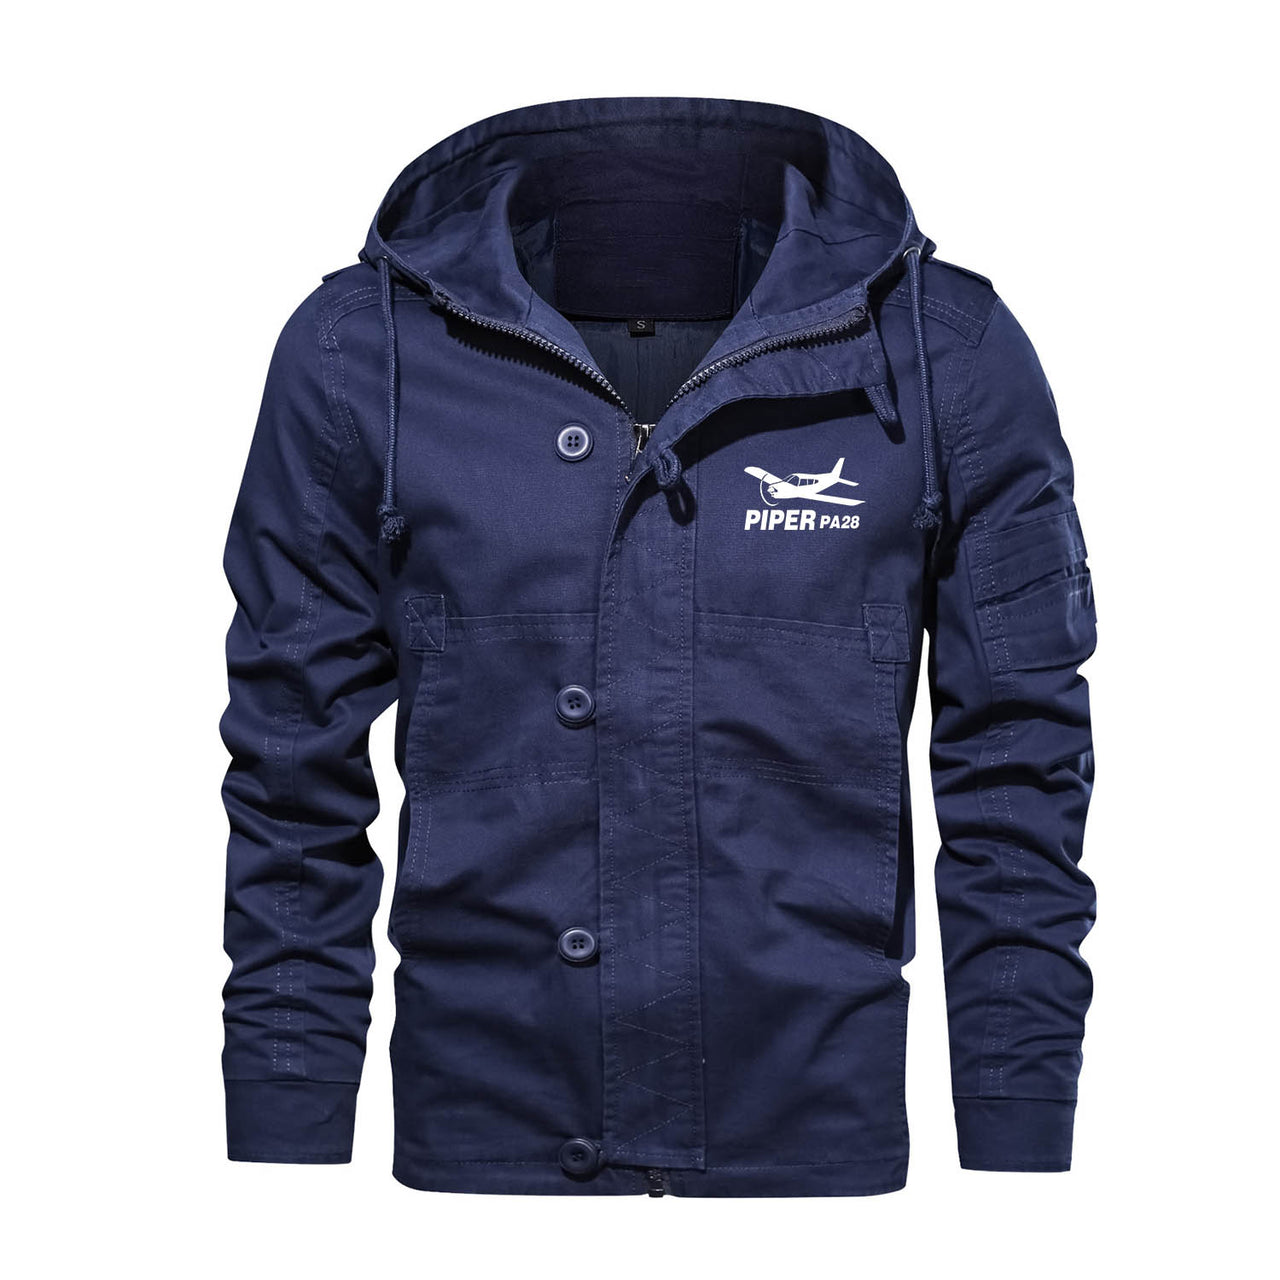 The Piper PA28 Designed Cotton Jackets